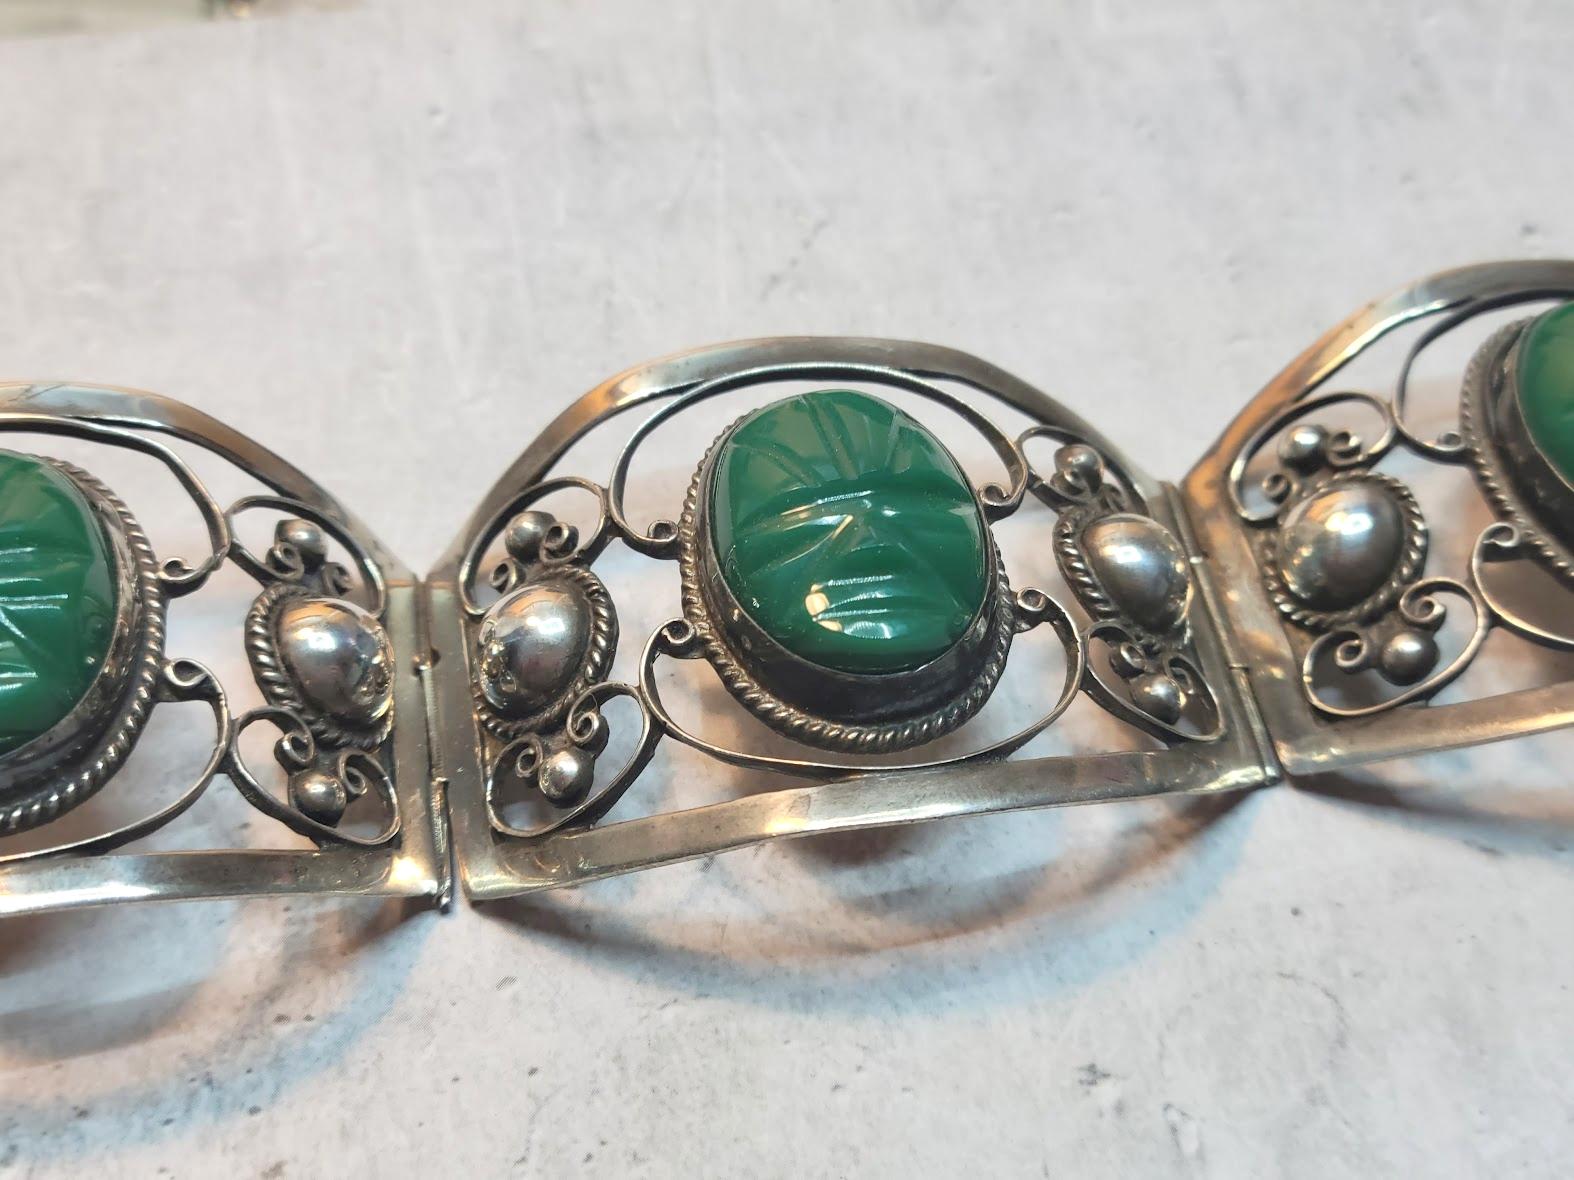 A Mexican bracelet comprised of fine sterling silver with green onyx cabochons in the form of Aztec masks.
The bracelet has decorative silver panels with heavy beading, swirls, and oval onyx Aztec masks. This vintage panel bracelet was made in